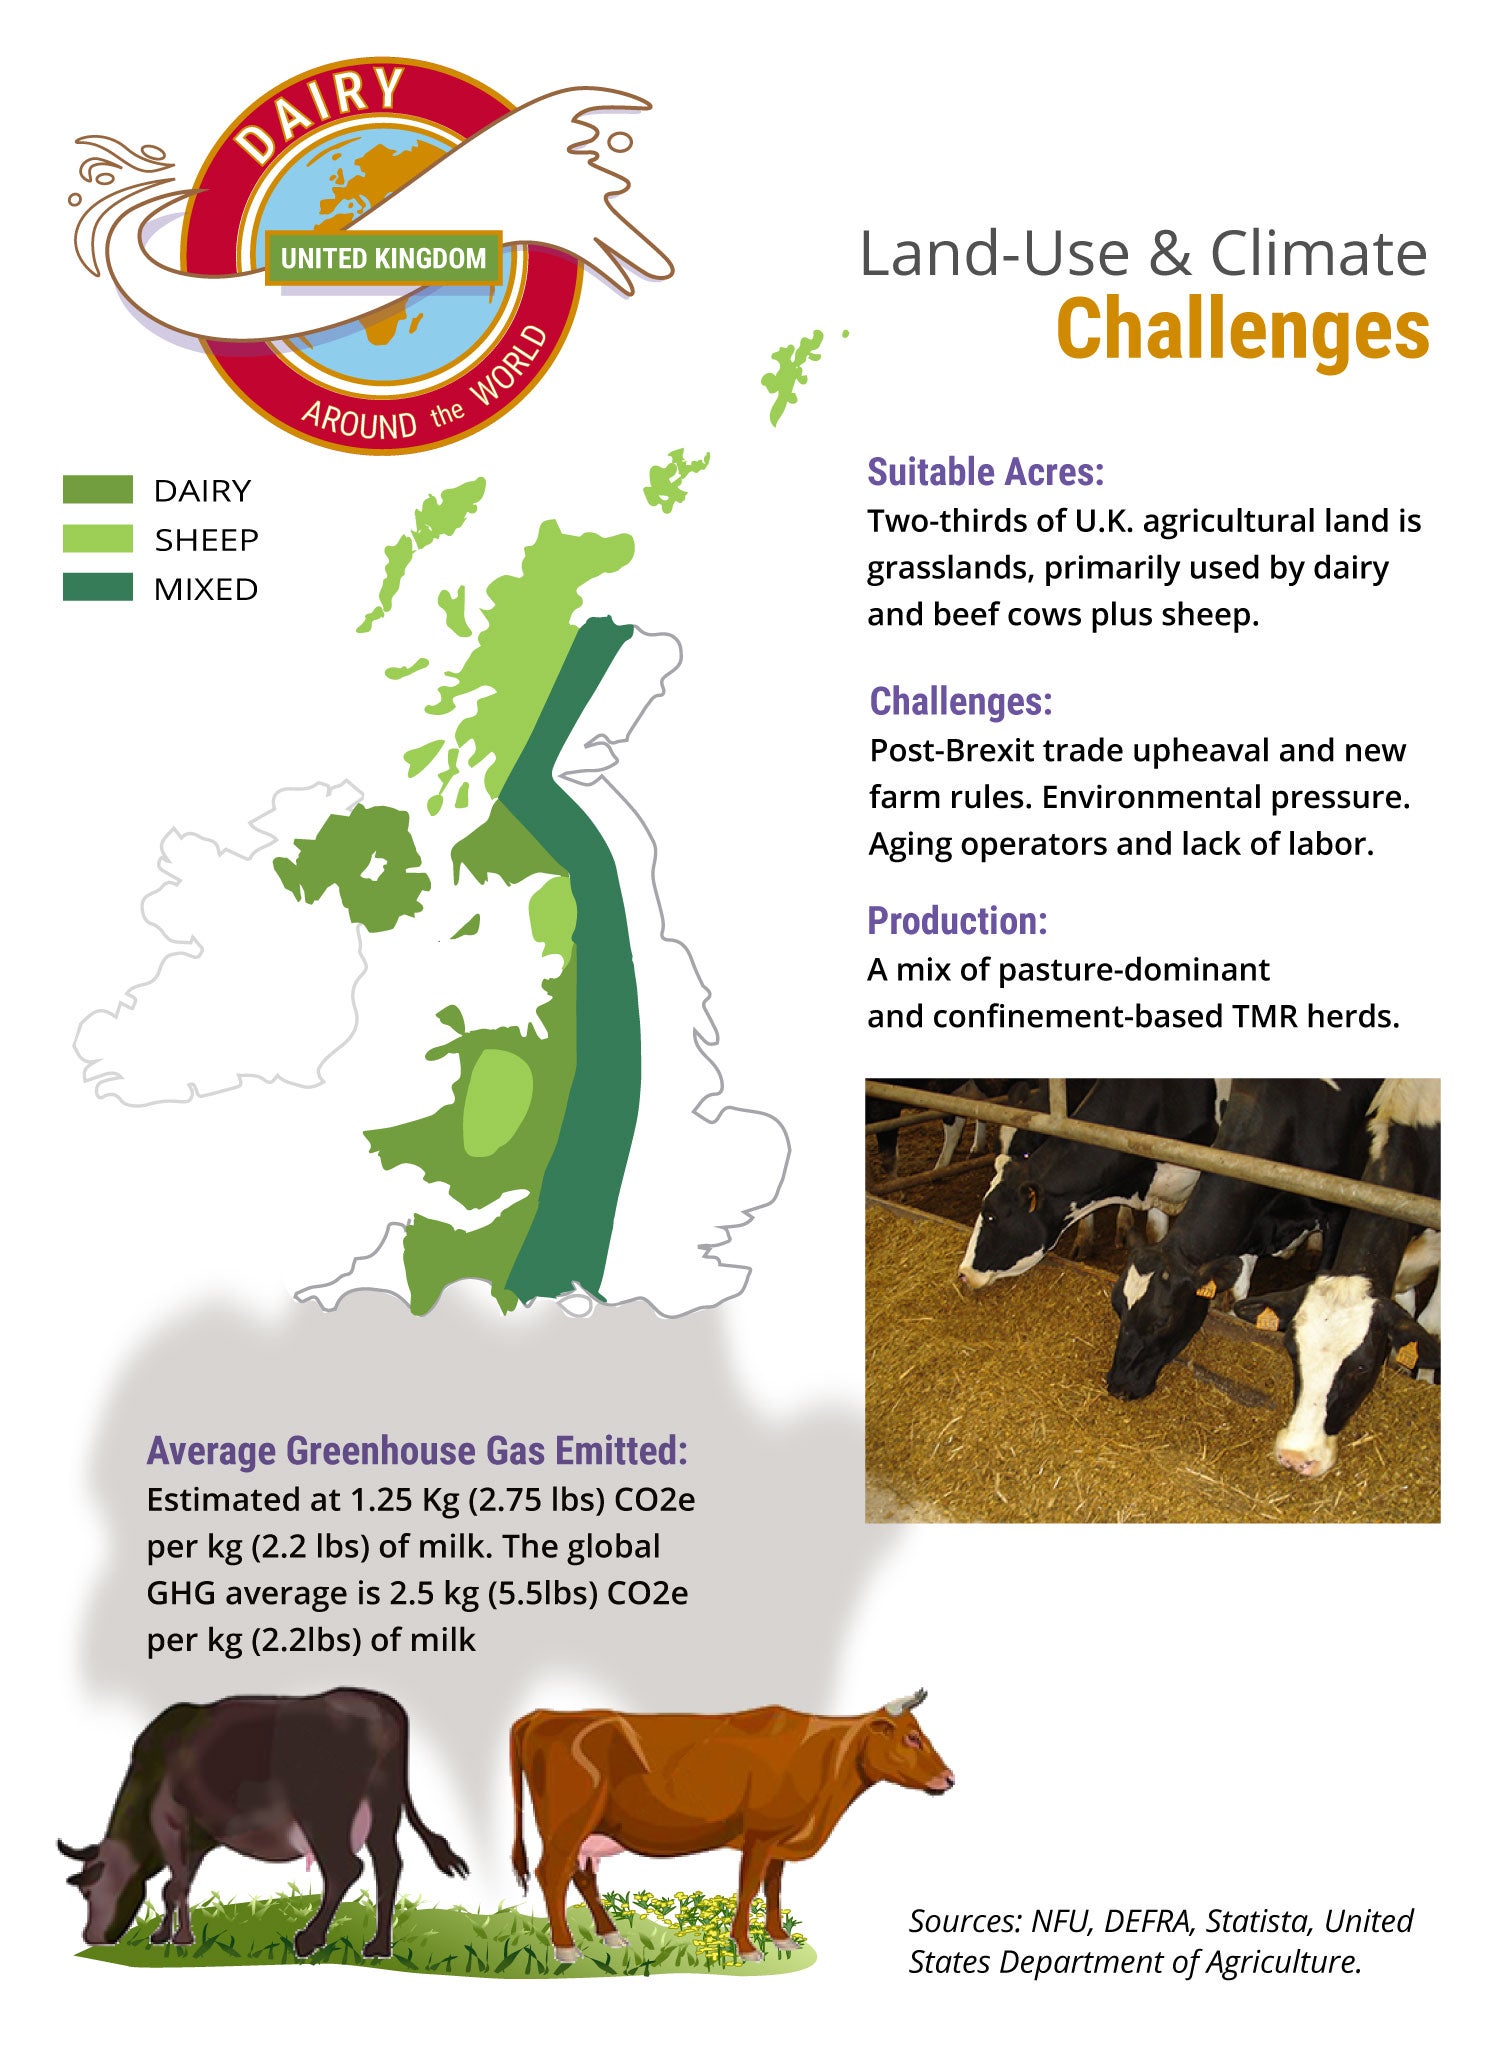 Dairy Around the World Infographic depicting Landu Use challenges for UK dairy farmers